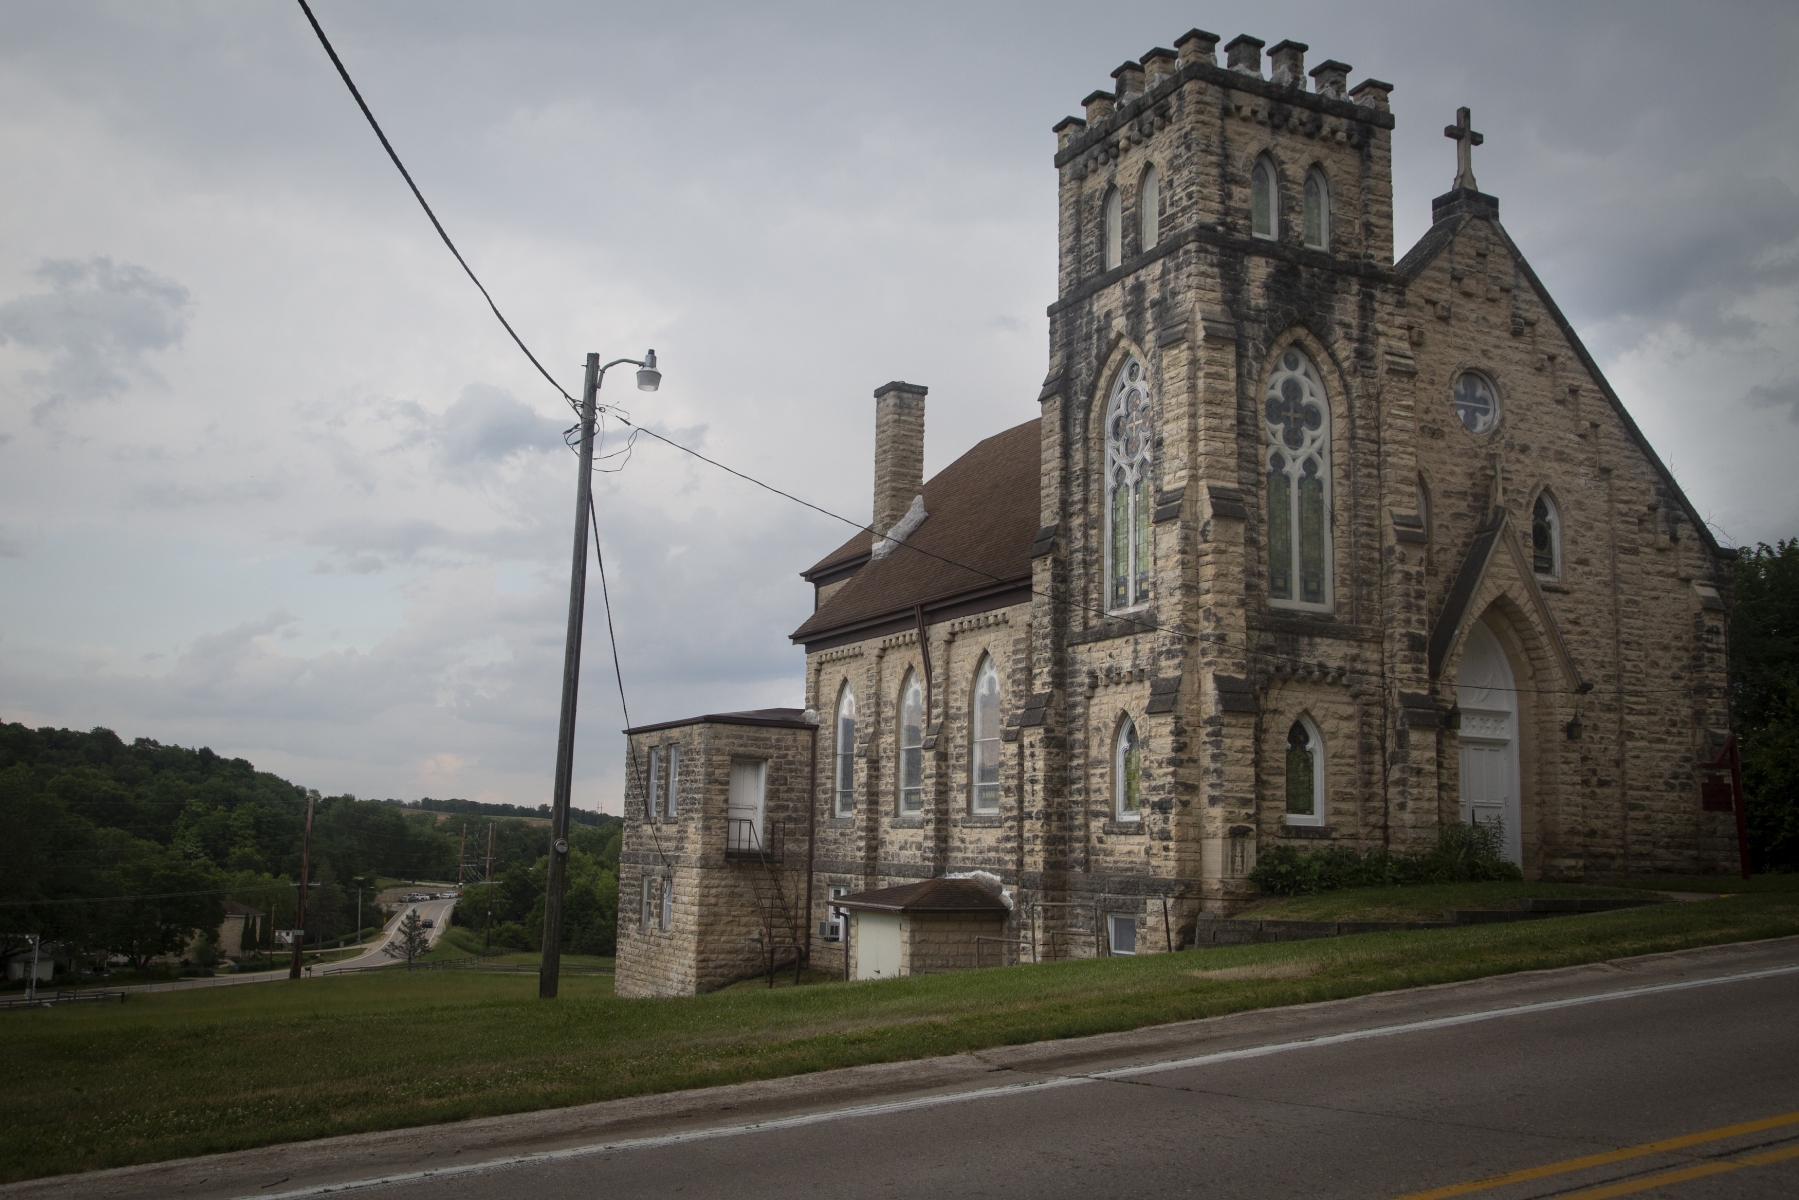 St. Joseph's Church in Stone City is seen during the RAGBRAI route inspection ride on Thursday, June 10, 2021. Day 5 of the route brings riders from Waterloo through the meeting town of Center Point to Anamosa. Riders also have the option of doing the Karras loop, bring the days total mileage to about 110.